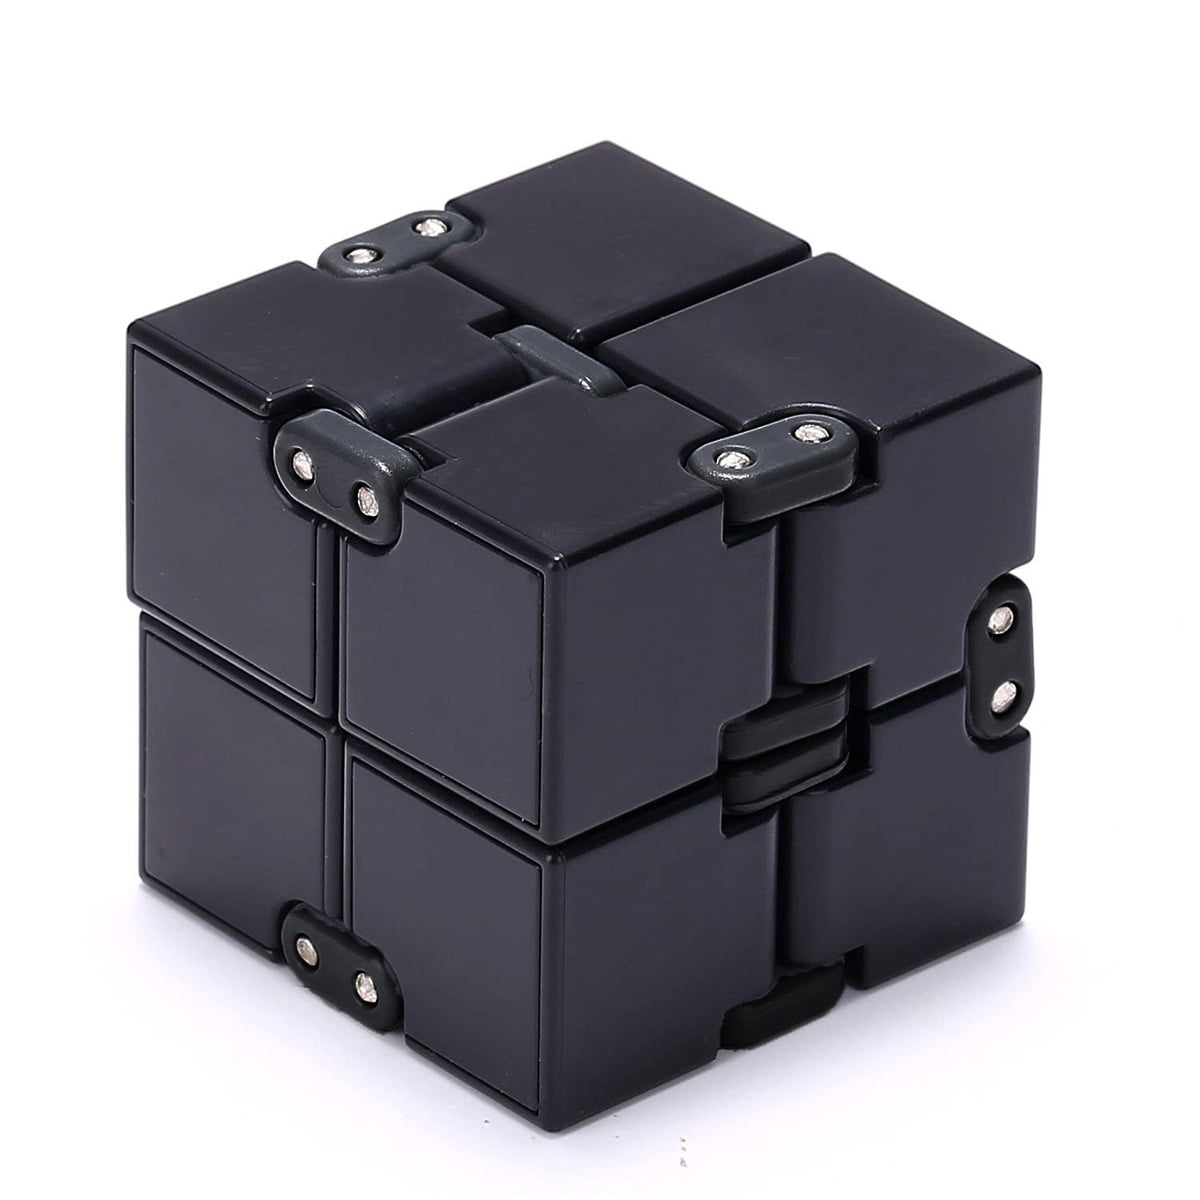 Plastic Infinity Cube Anti Stress Toy Hobby Anxiety Relief 